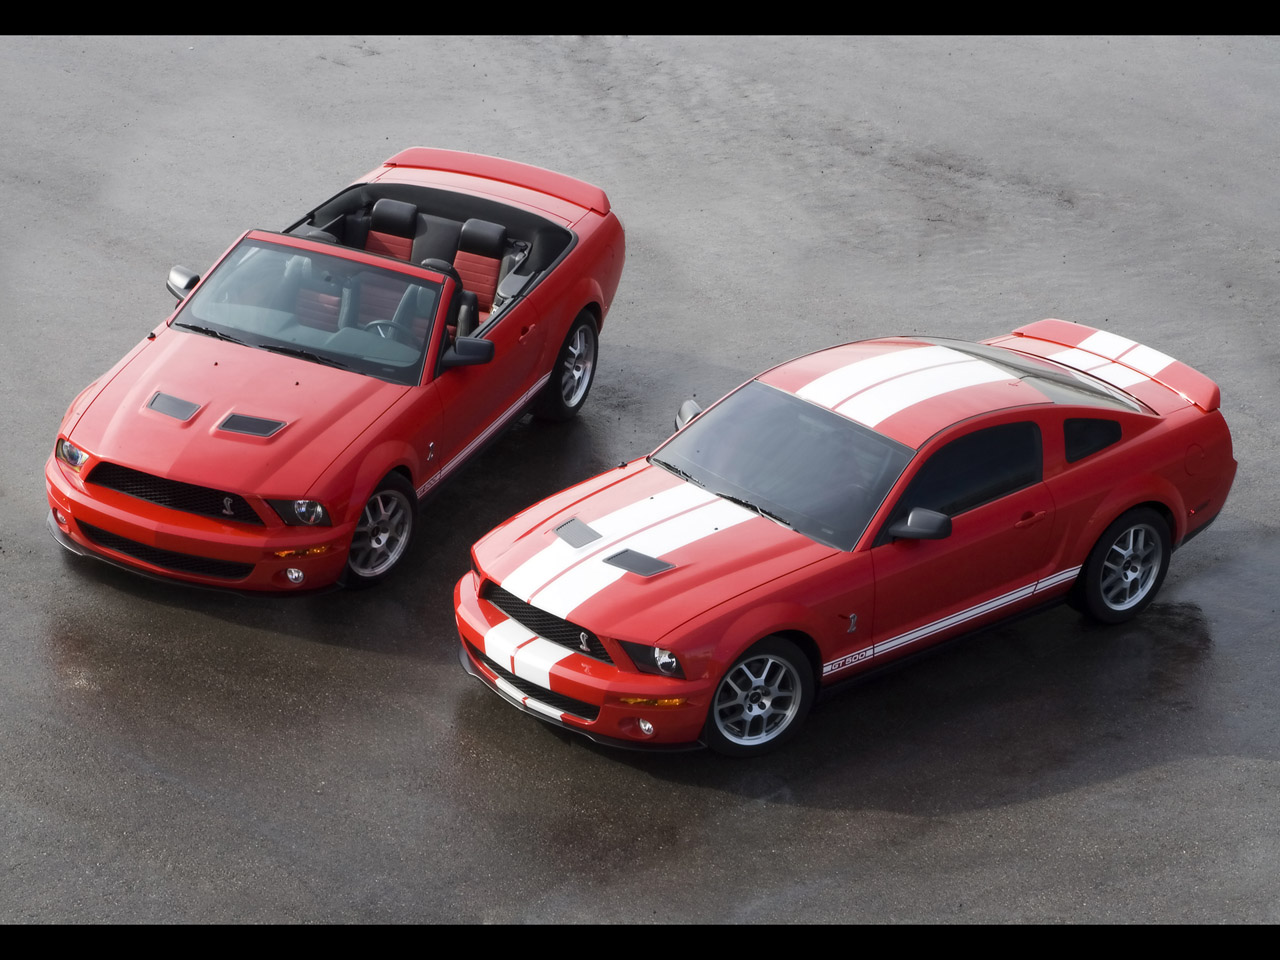 Ford Mustang: 2005-present, 5th generation